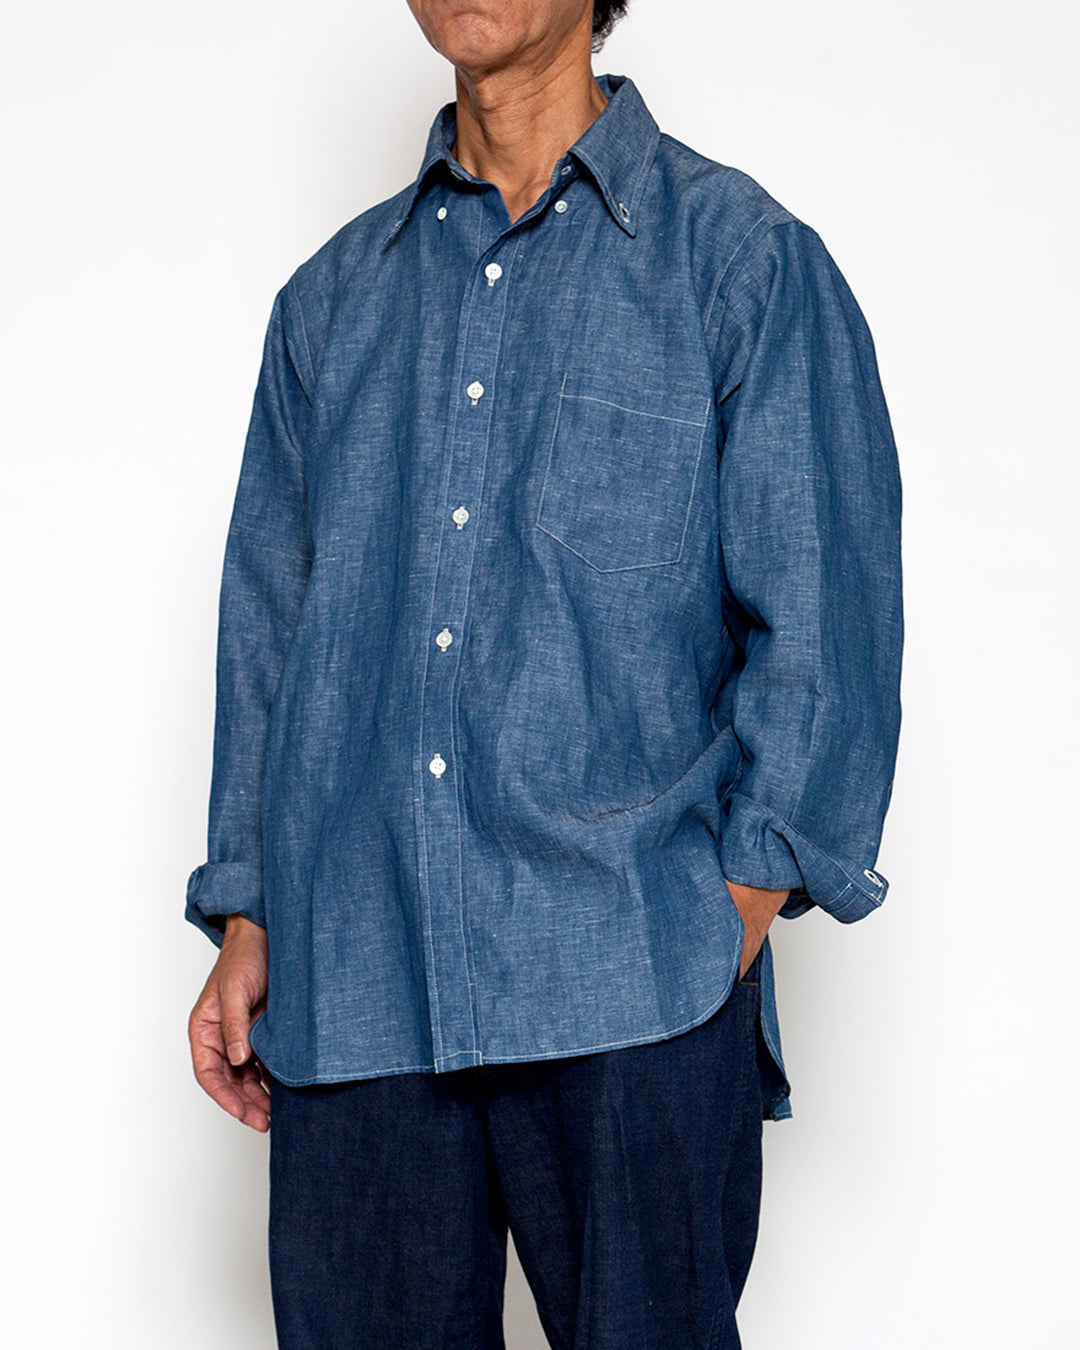 【DELIVERY】THE CORONA UTILITY - WHITE COLLAR WORK SHIRT